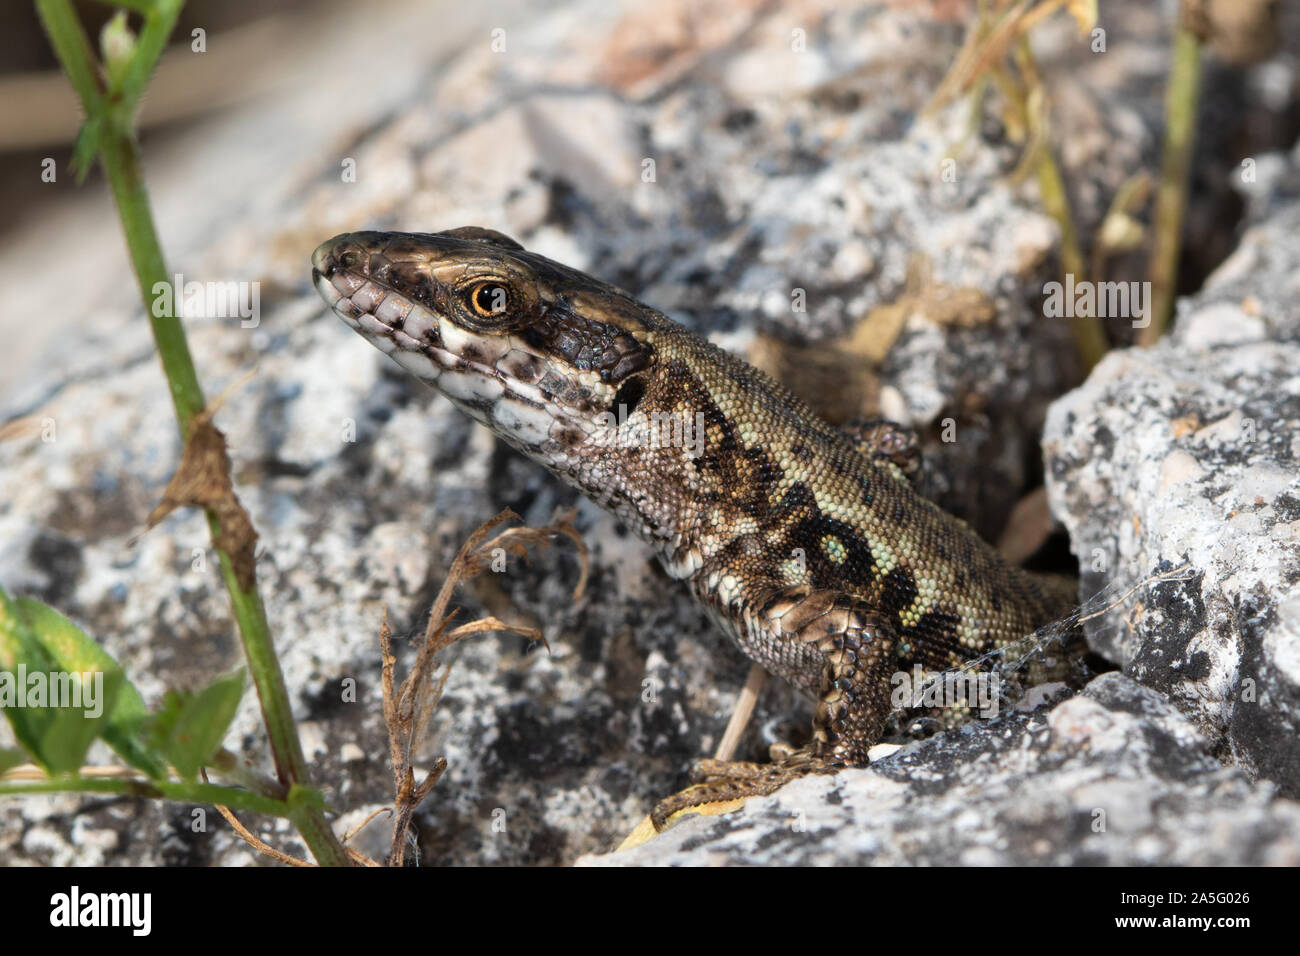 Common Wall Lizard (Podarcis muralis) cautiously emerging from a rock crevice Stock Photo